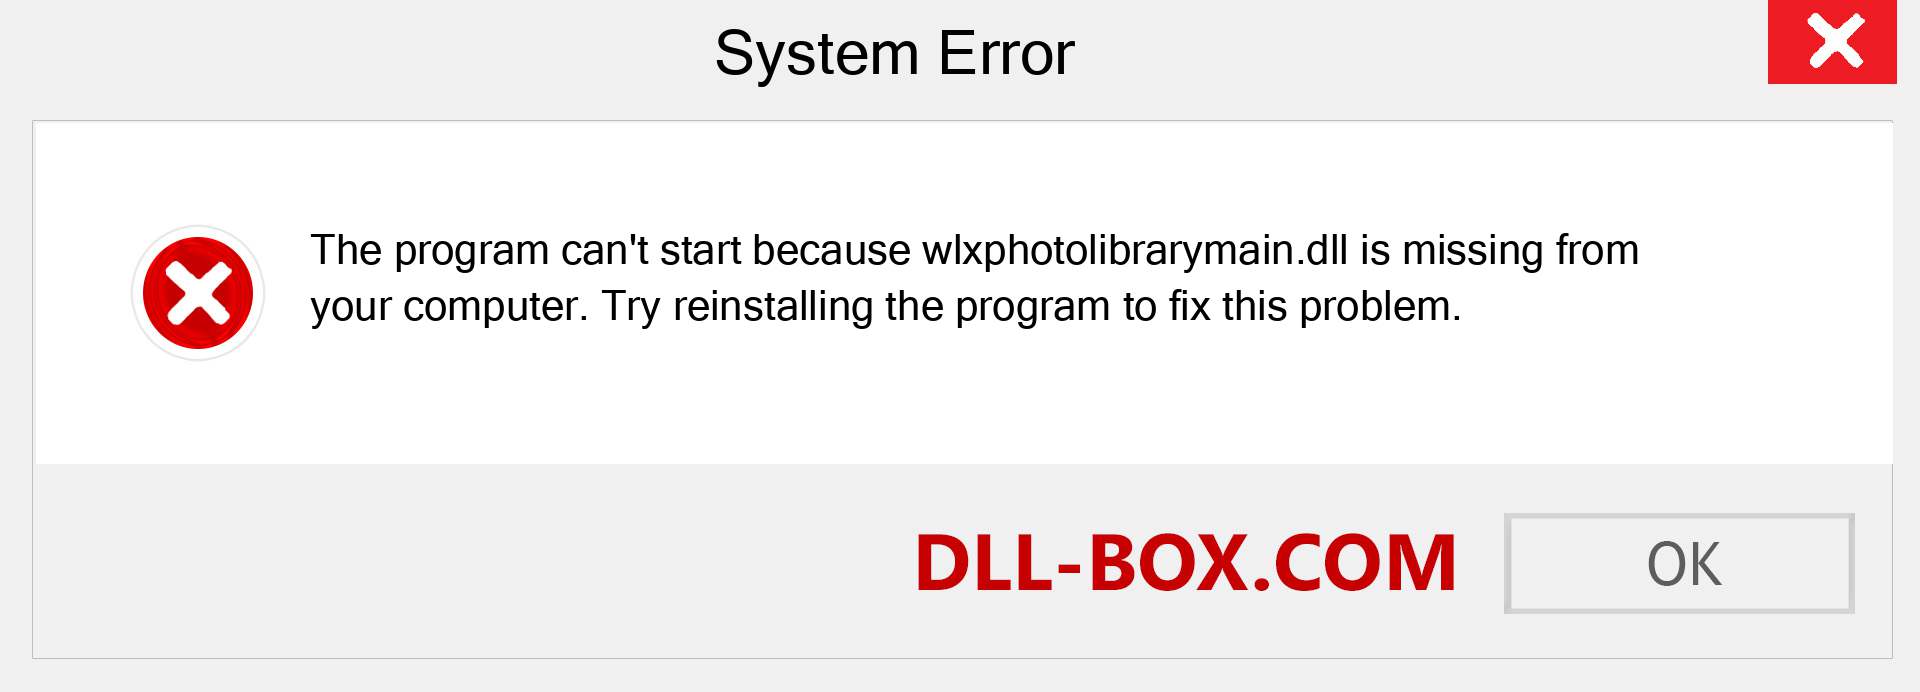  wlxphotolibrarymain.dll file is missing?. Download for Windows 7, 8, 10 - Fix  wlxphotolibrarymain dll Missing Error on Windows, photos, images